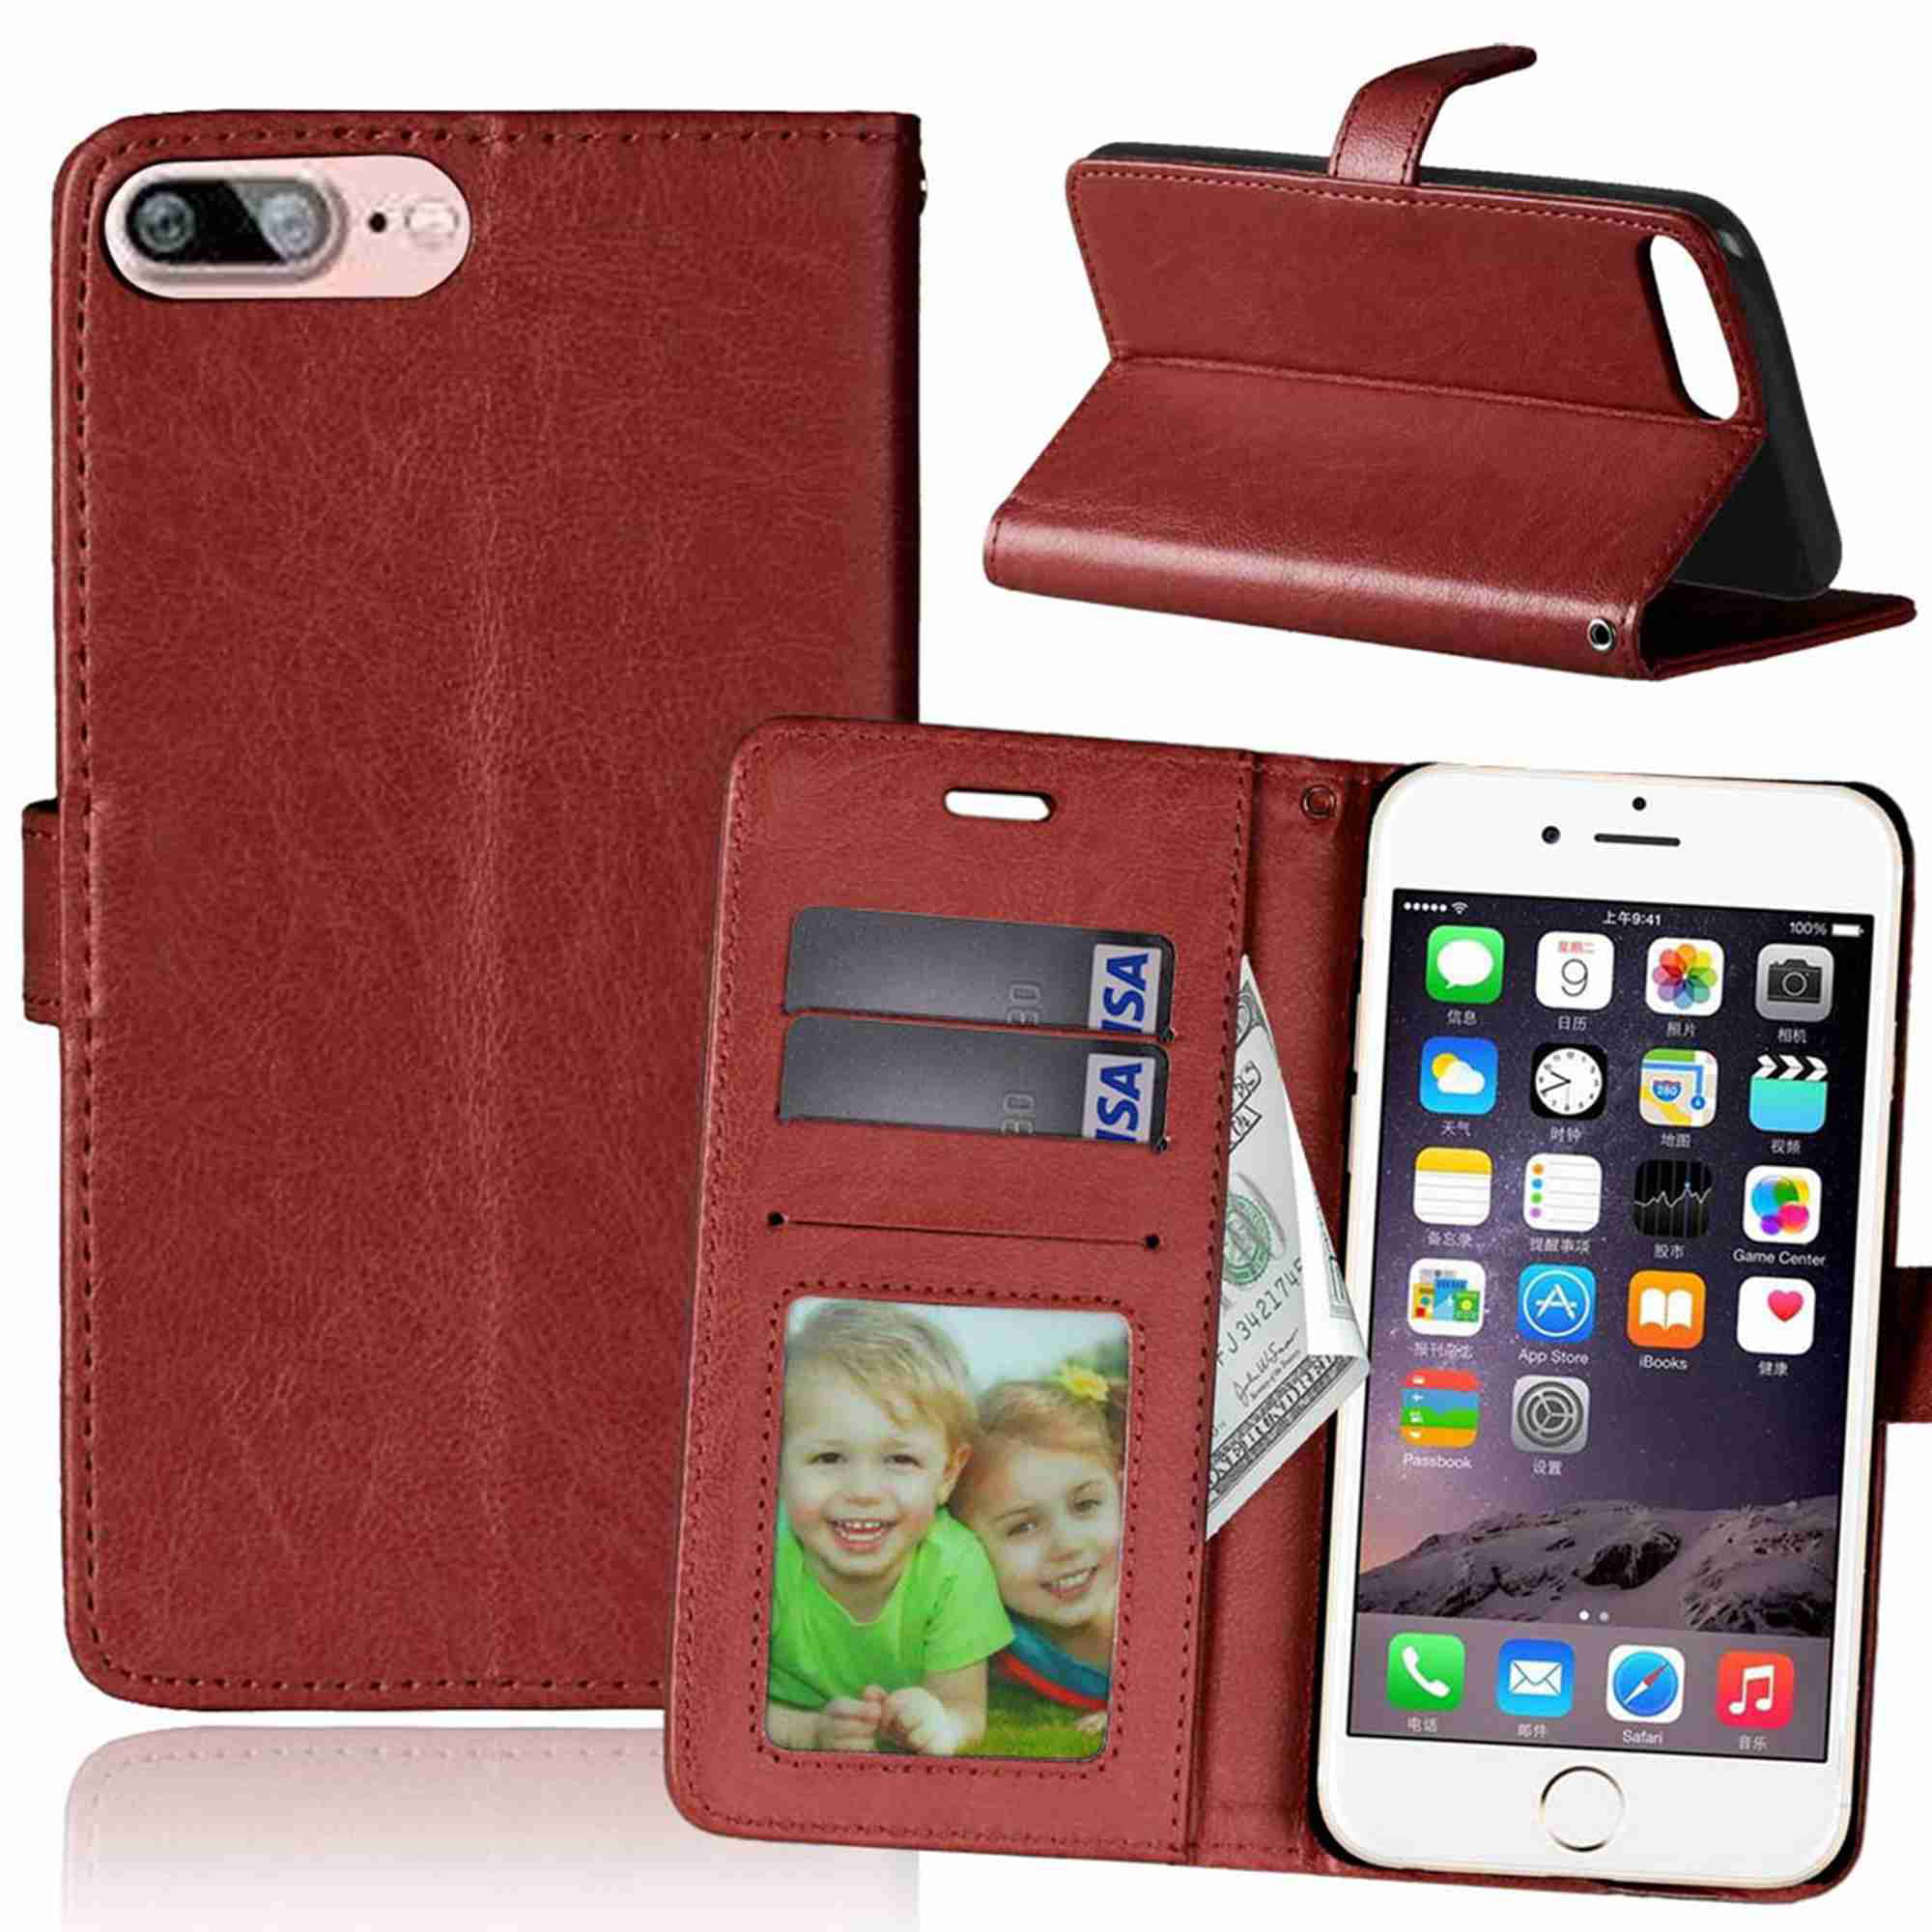 Cover for iPhone 7 Leather Kickstand Wallet Cover Card Holders Extra-Protective Business with Free Waterproof-Bag Delicate iPhone 7 Flip Case 